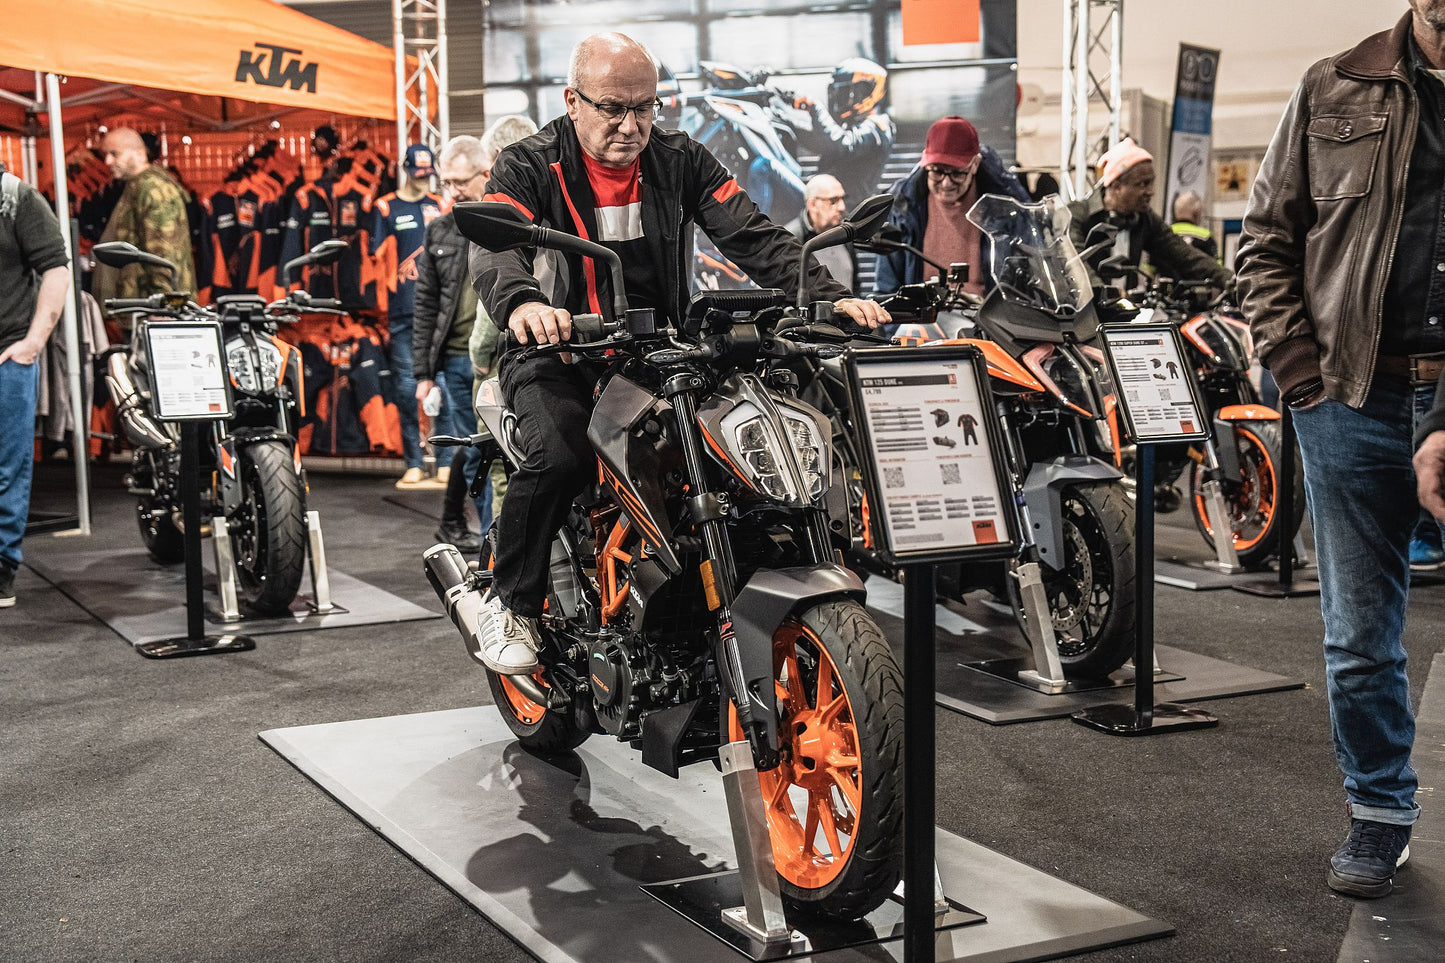 London Motorcycle Show